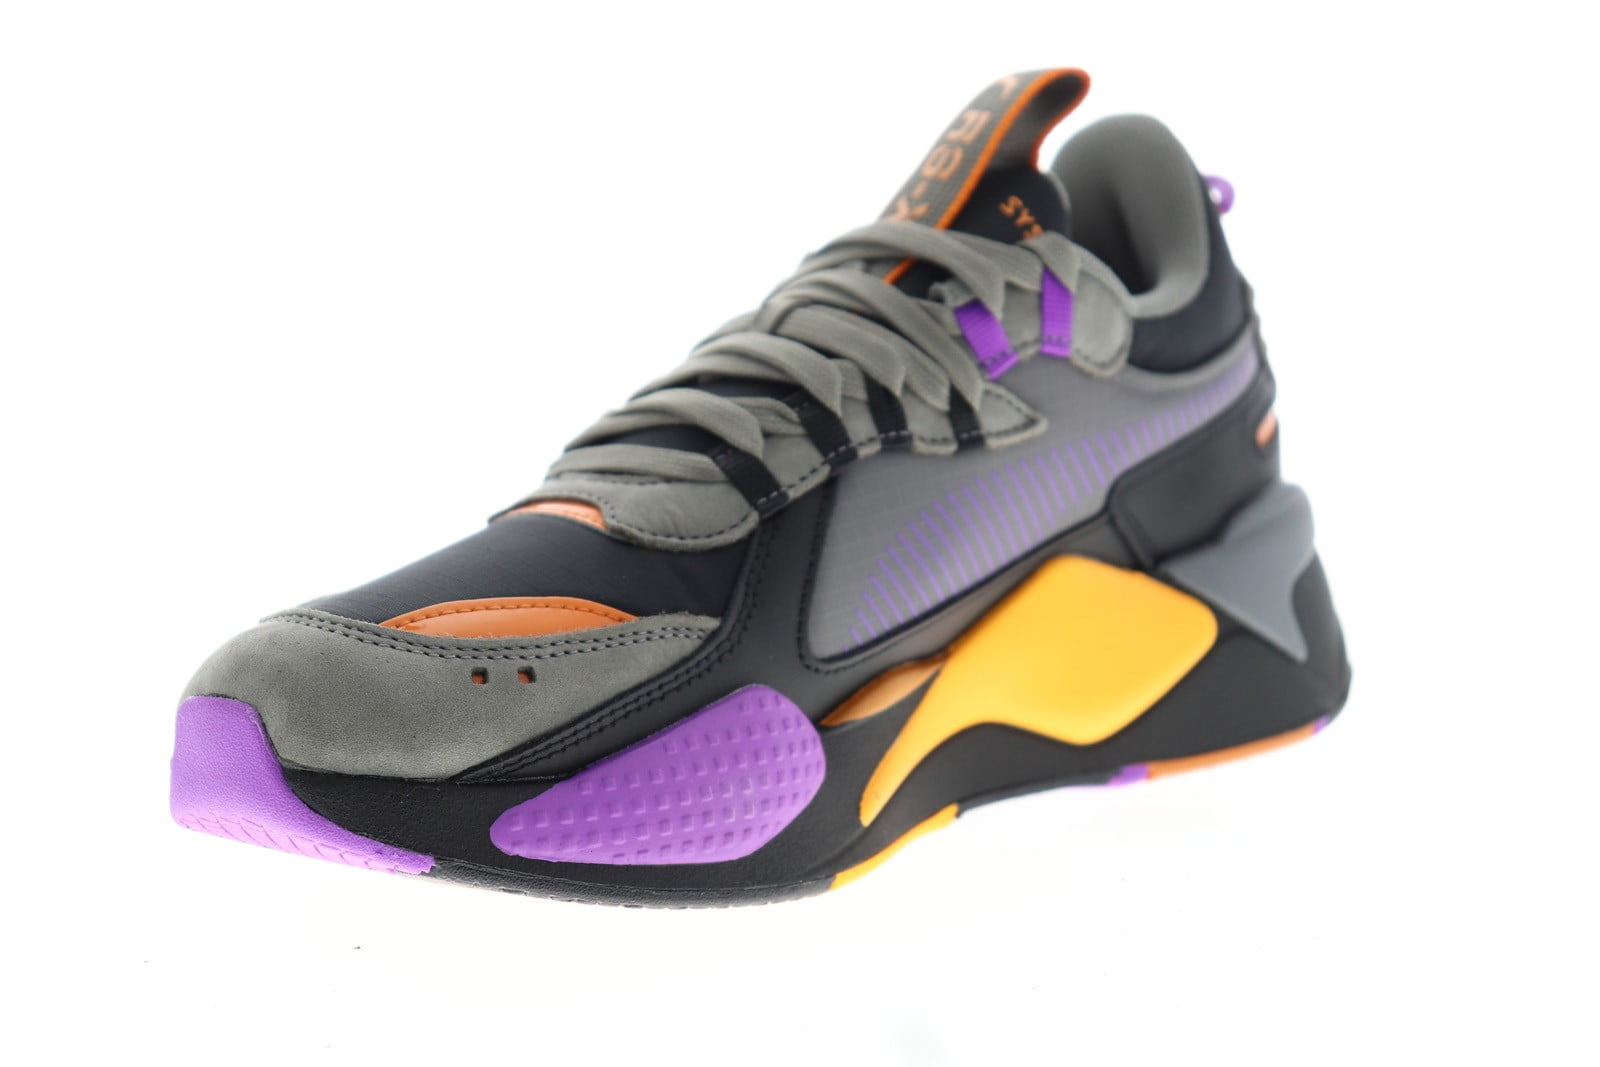 Puma RS-X OH Men's Shoes Black-Pur Glimmer-Steel Gray 372803-01